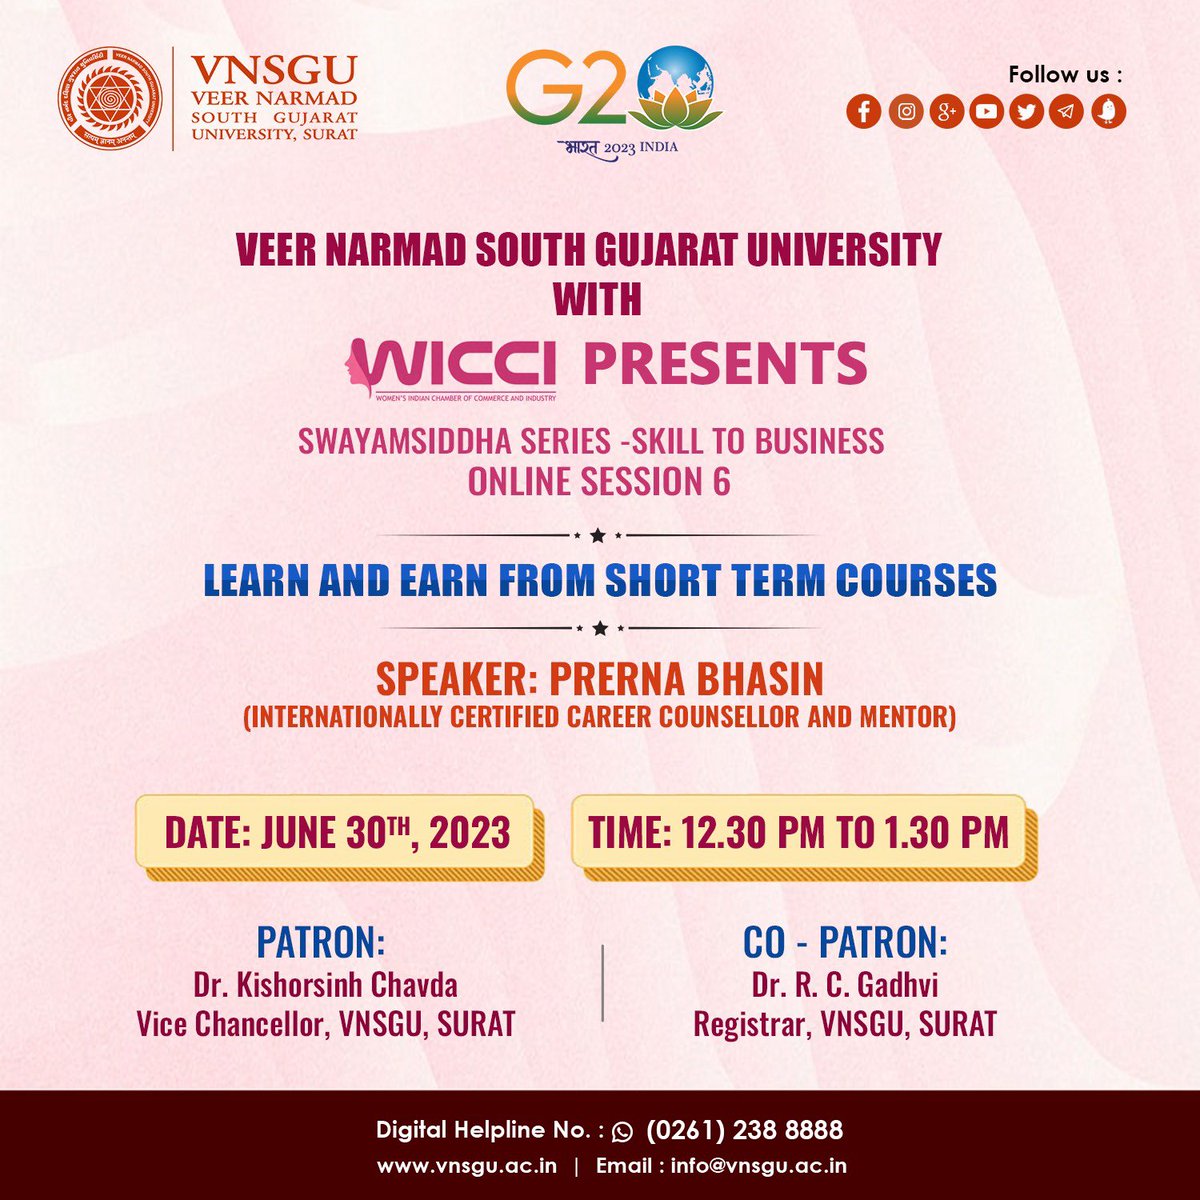 Veer Narmad South Gujarat University is inviting you to a scheduled Zoom meeting.

Topic: LEARN AND EARN FROM SHORT TERM COURSES
Time: Jun 30, 2023 12:30 PM India

Join Zoom Meeting
zoom.us/j/94286038701?…

Meeting ID: 942 8603 8701
Passcode: 123456
.

.